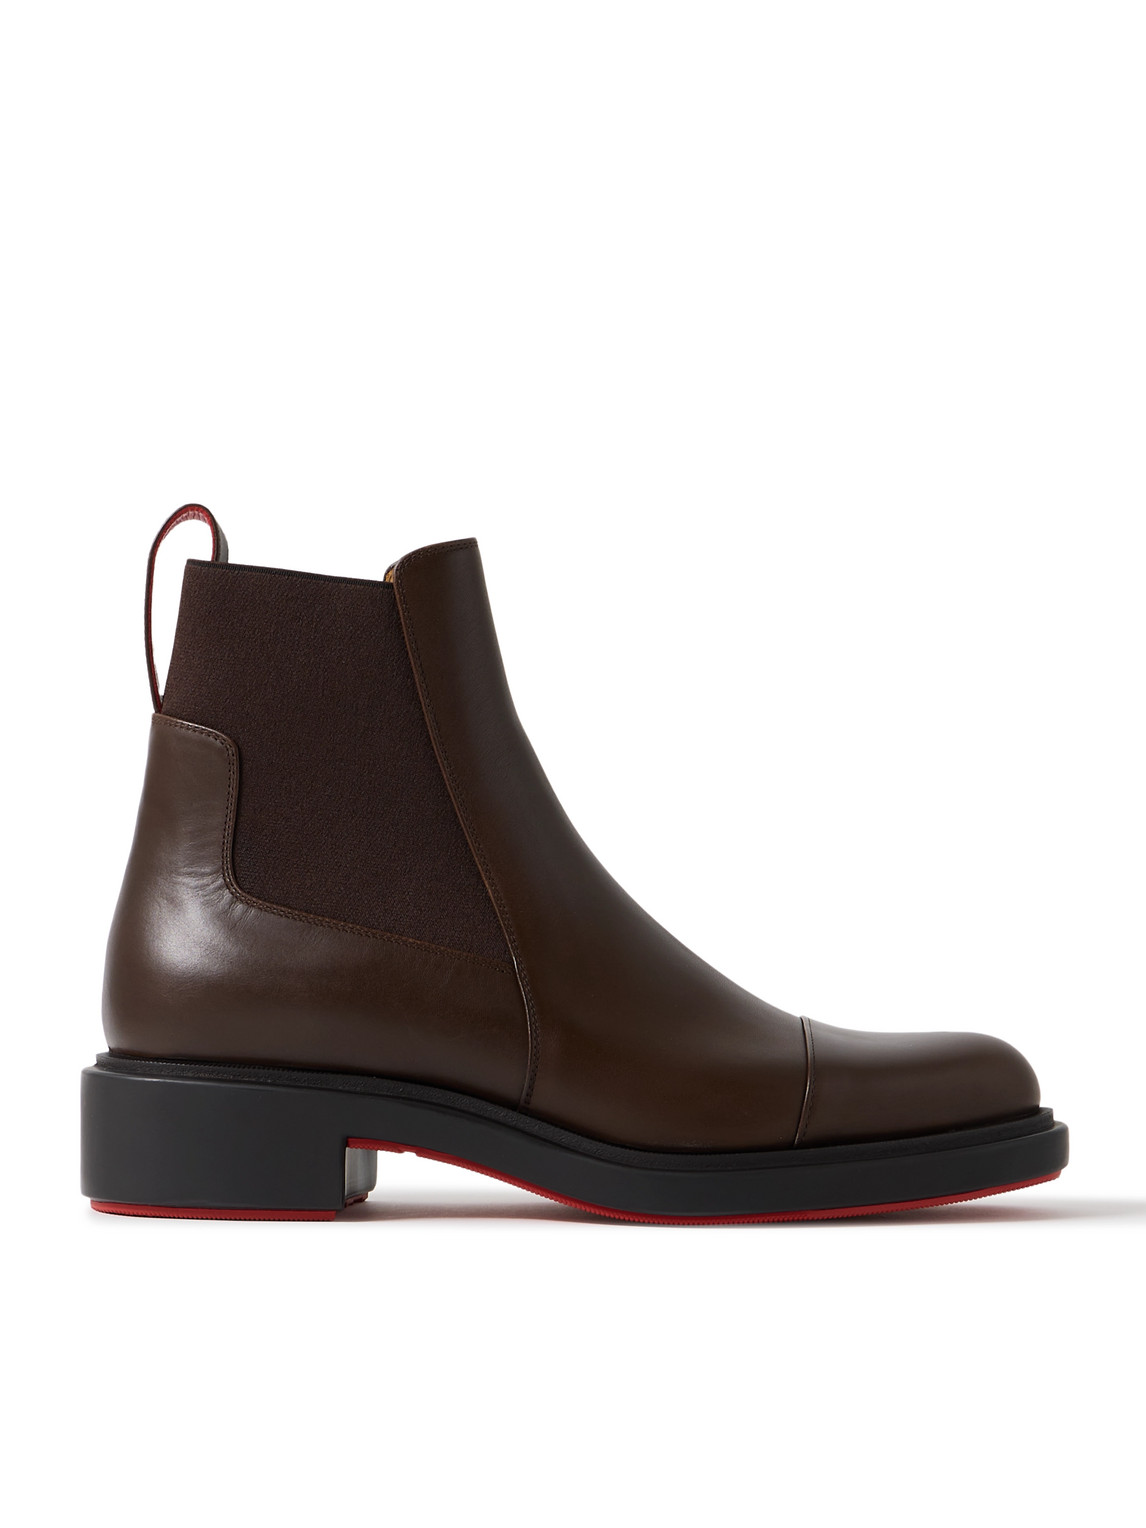 Christian Louboutin Urbino Leather Chelsea Boots In Brown